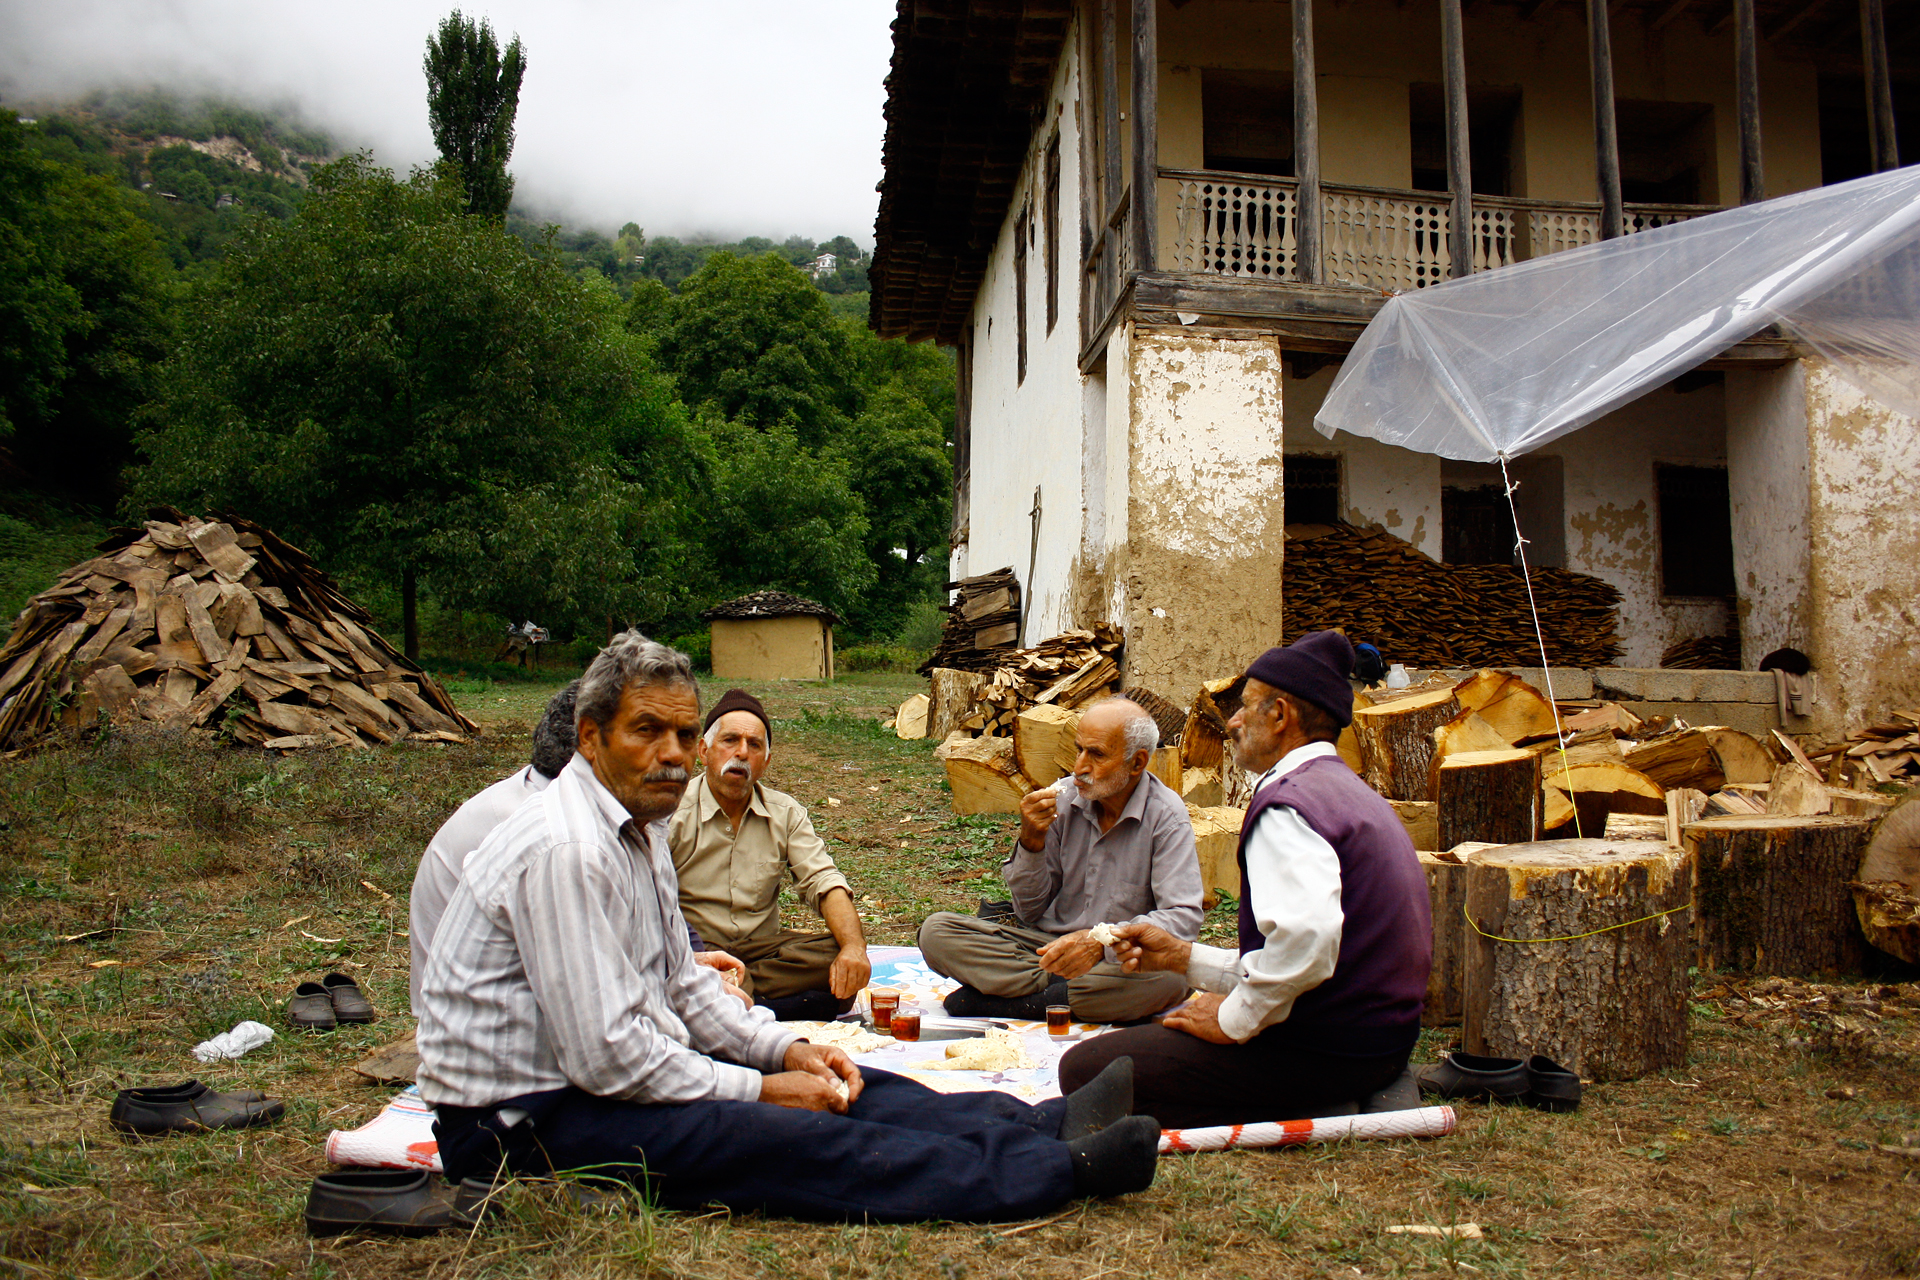 Local carpenters in Gilan, Iran drink tea in the afternoon. They made 15,000 wooden sheets of oak wood to repair the old house roof of his grandparent’s farmhouse.